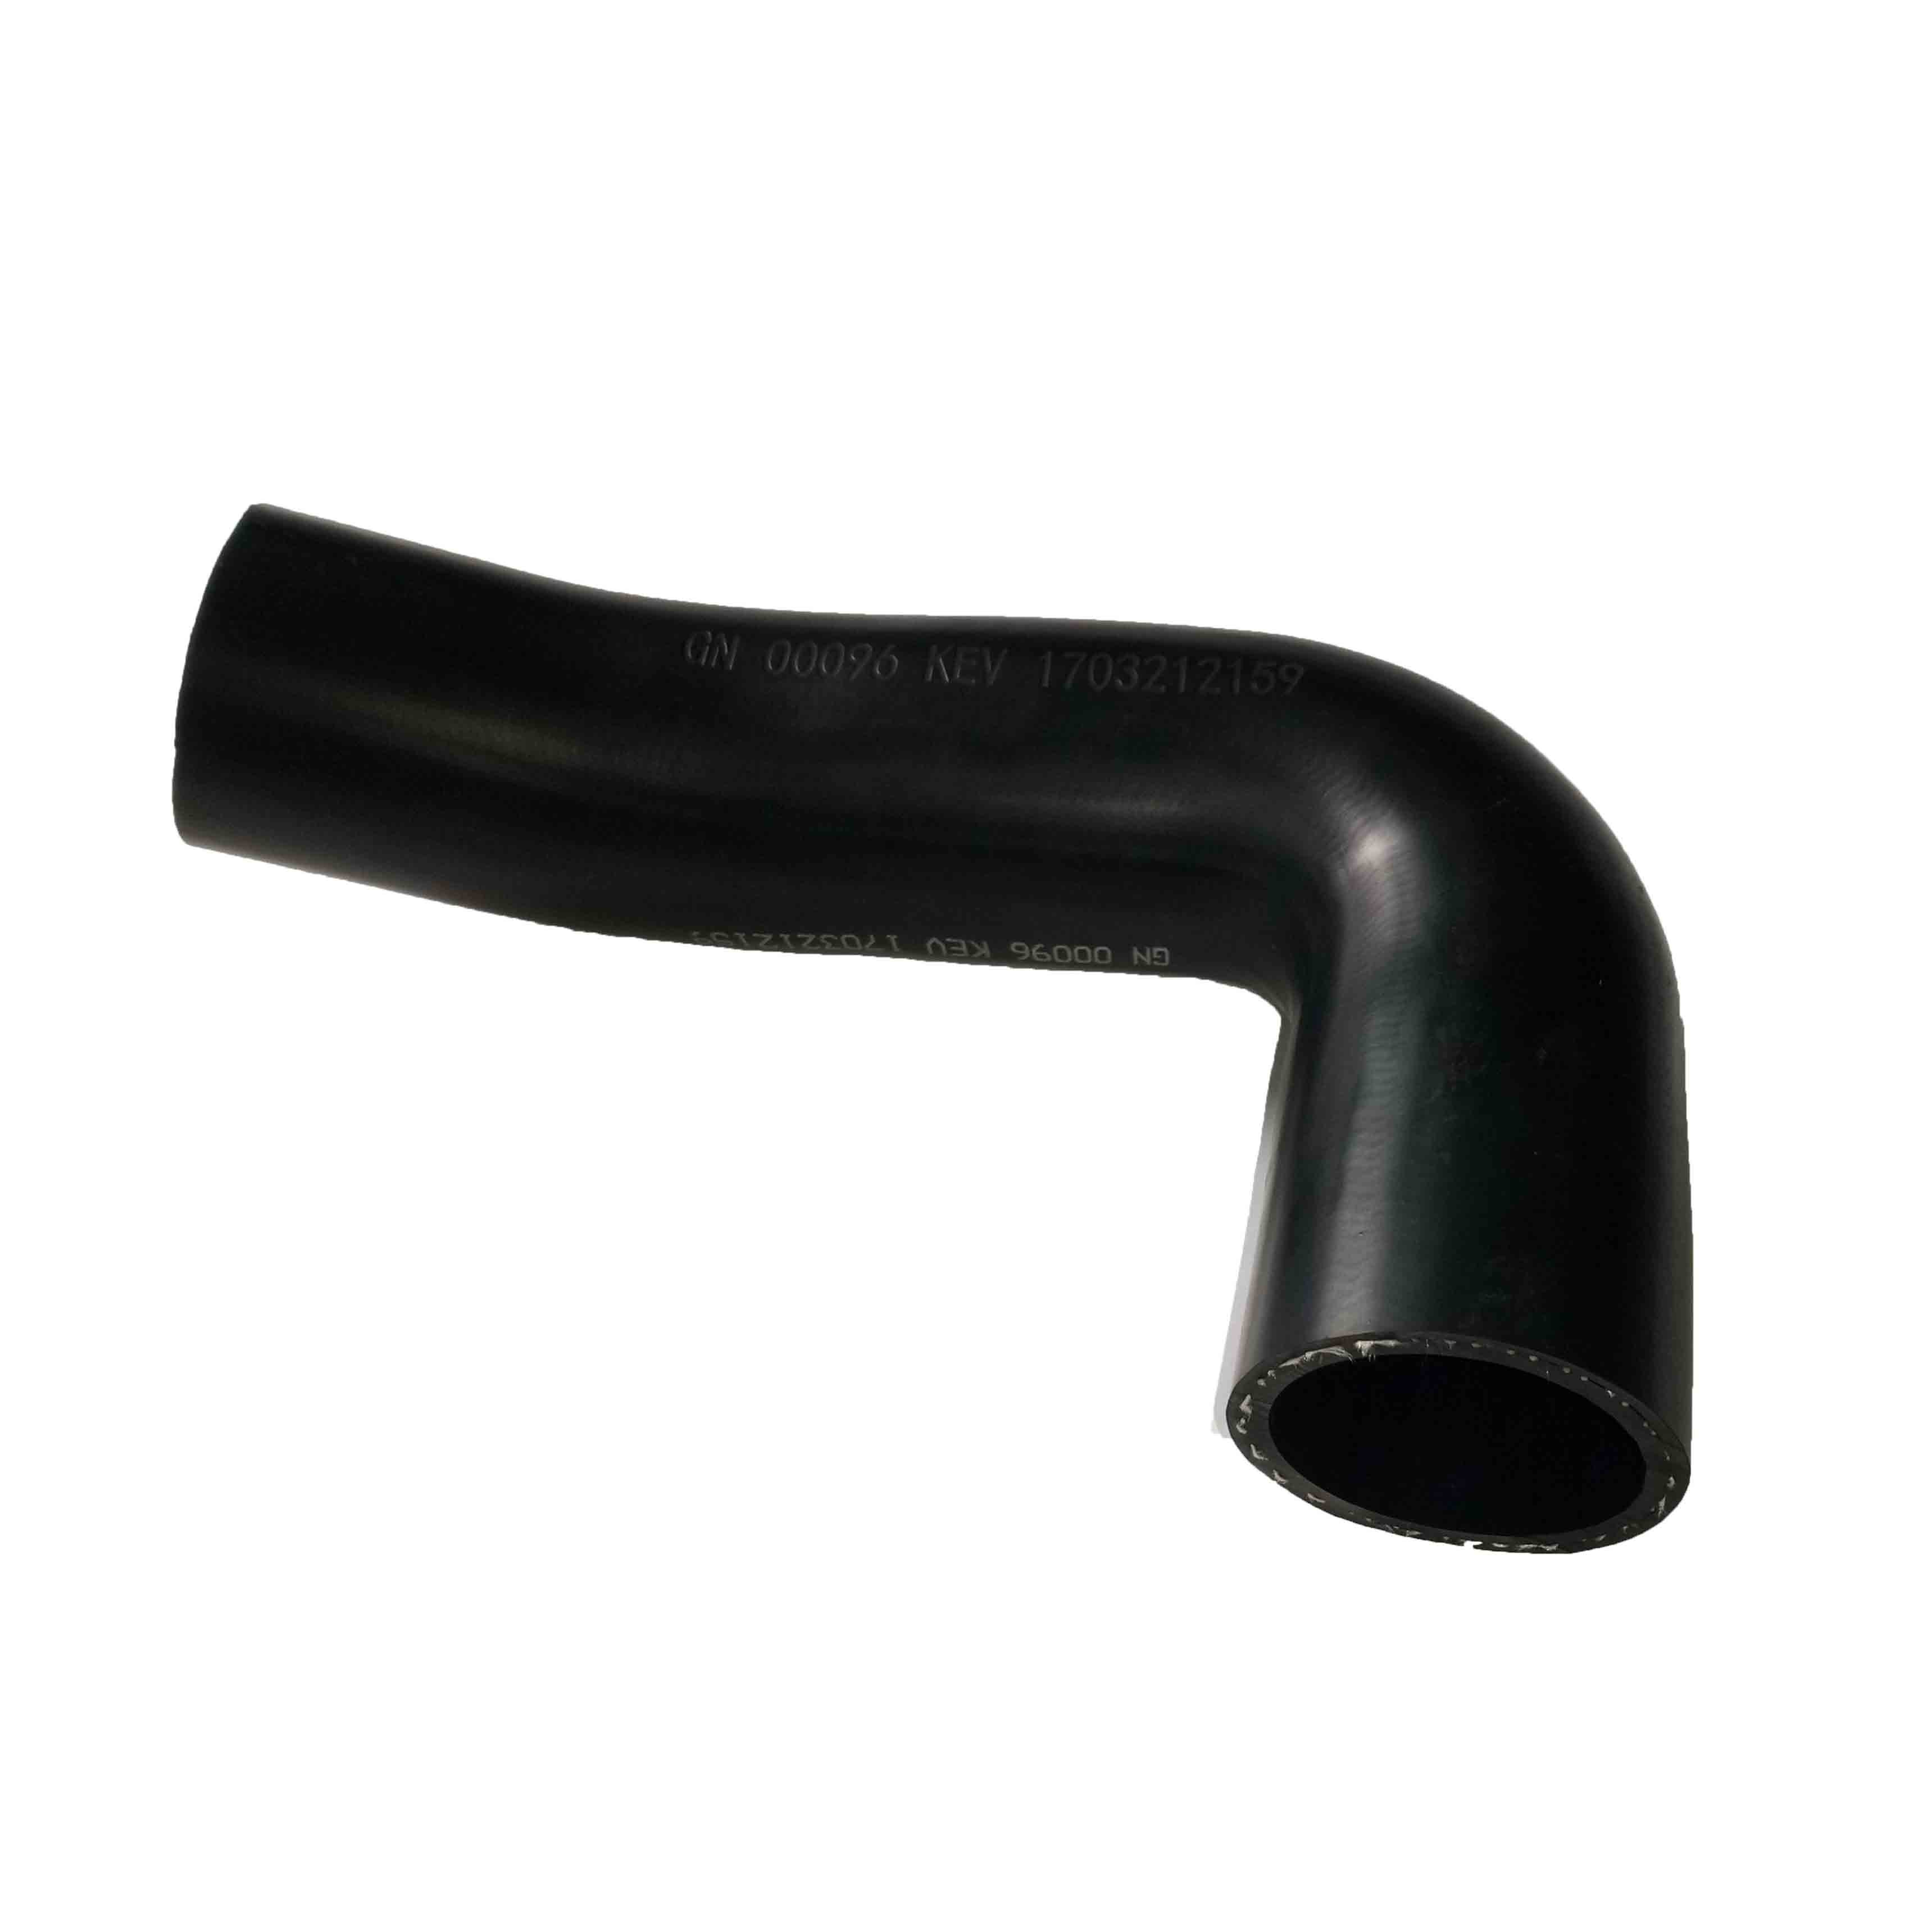 Flexible Air Water Fuel Oil Delivery Multi Purpose Rubber Hose